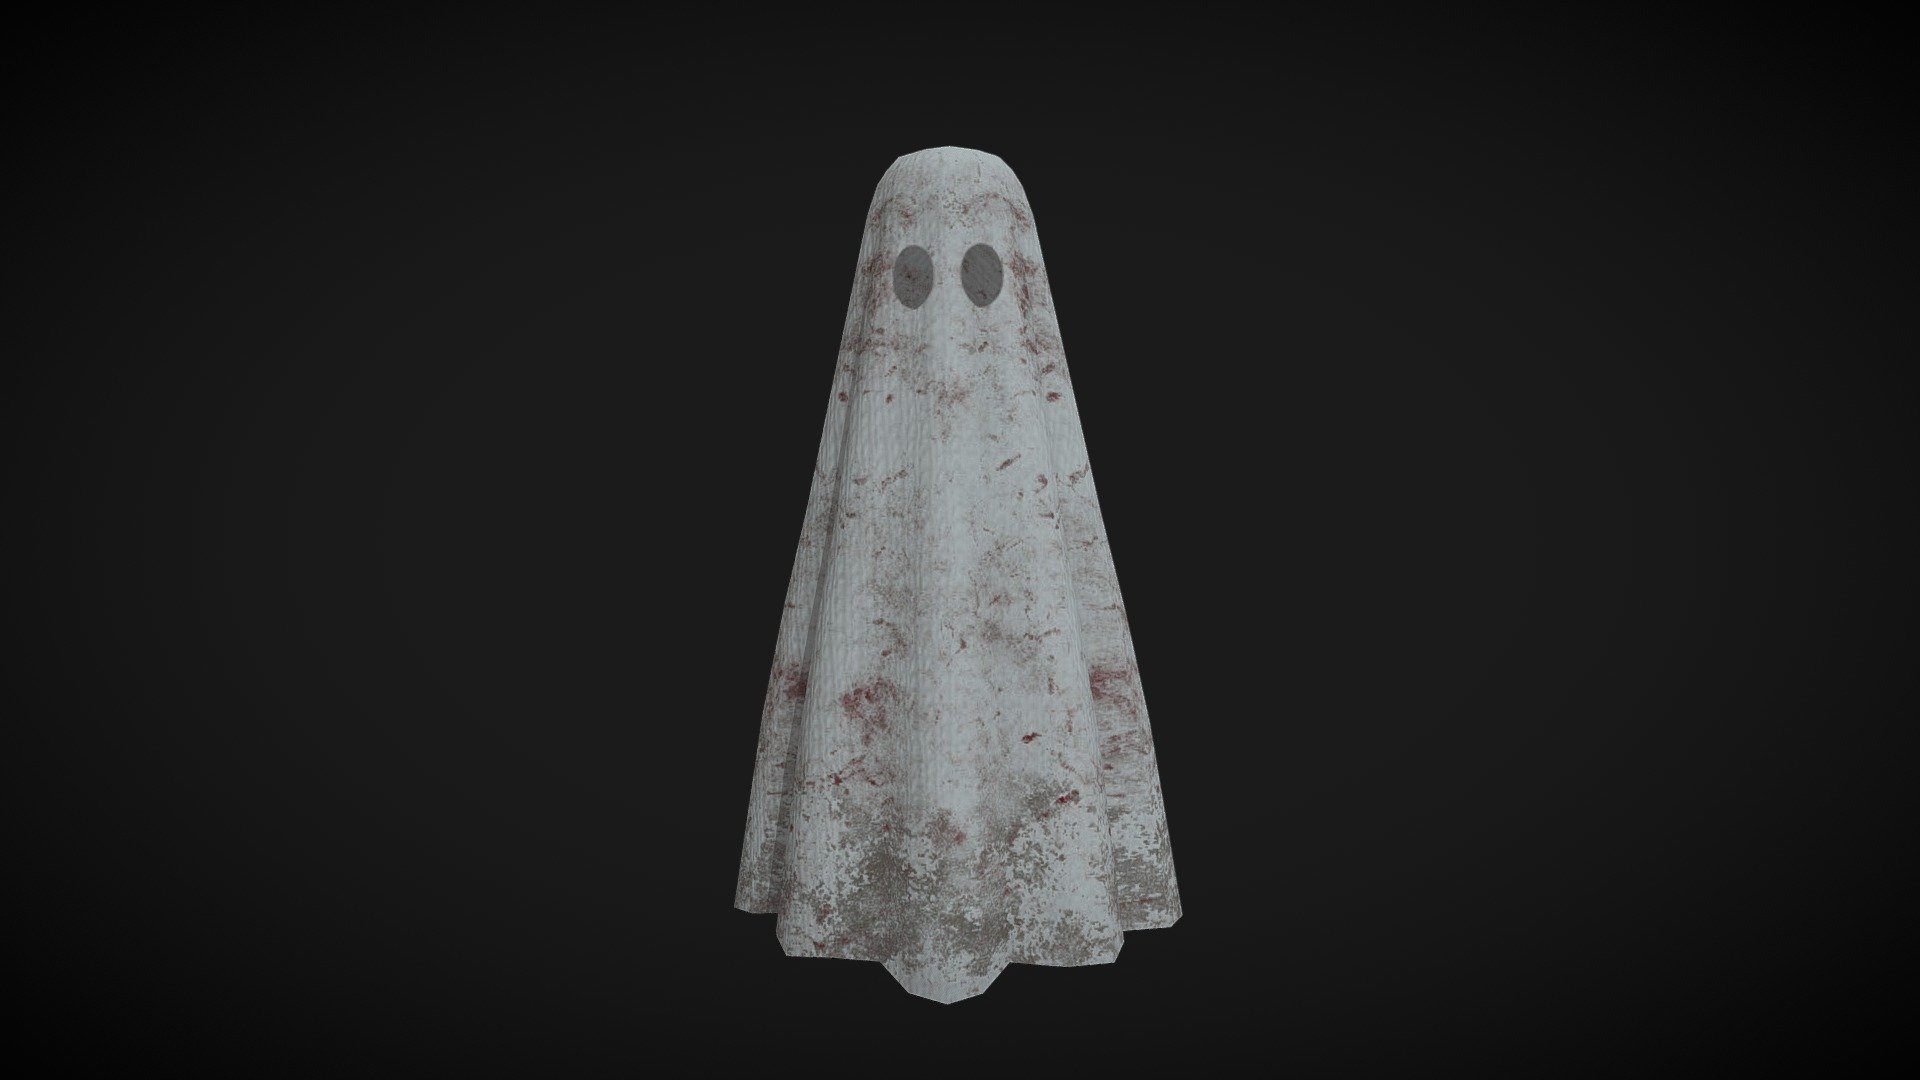 Created this low poly ghost for a college game project using Maya and Substance Painter 3d model